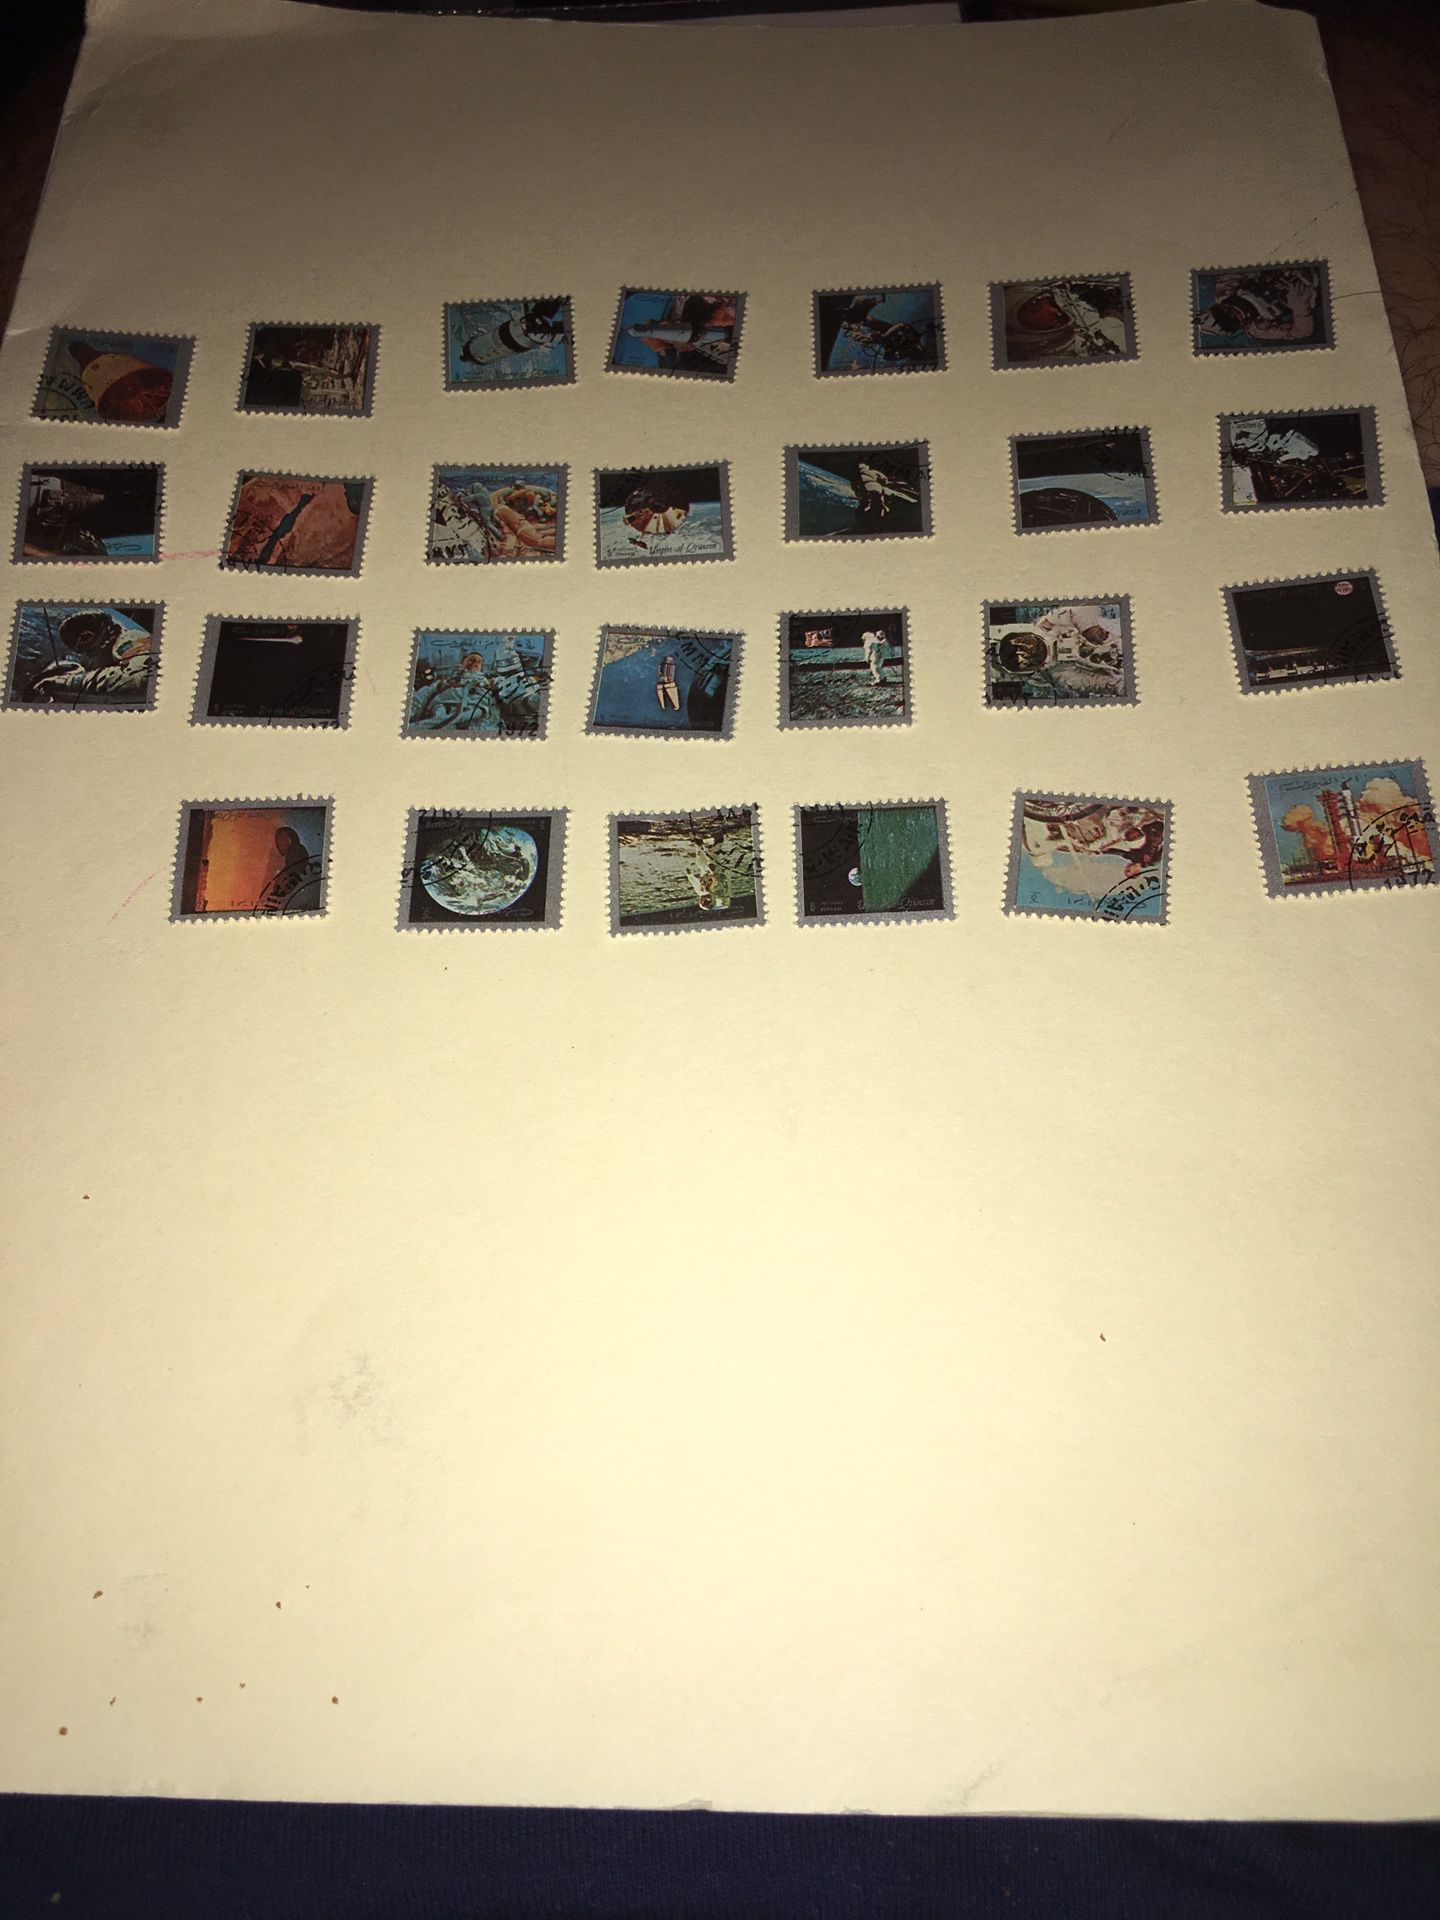 Mixed lot of used 27 stamps from Umm Al Qiwain. All offers considered